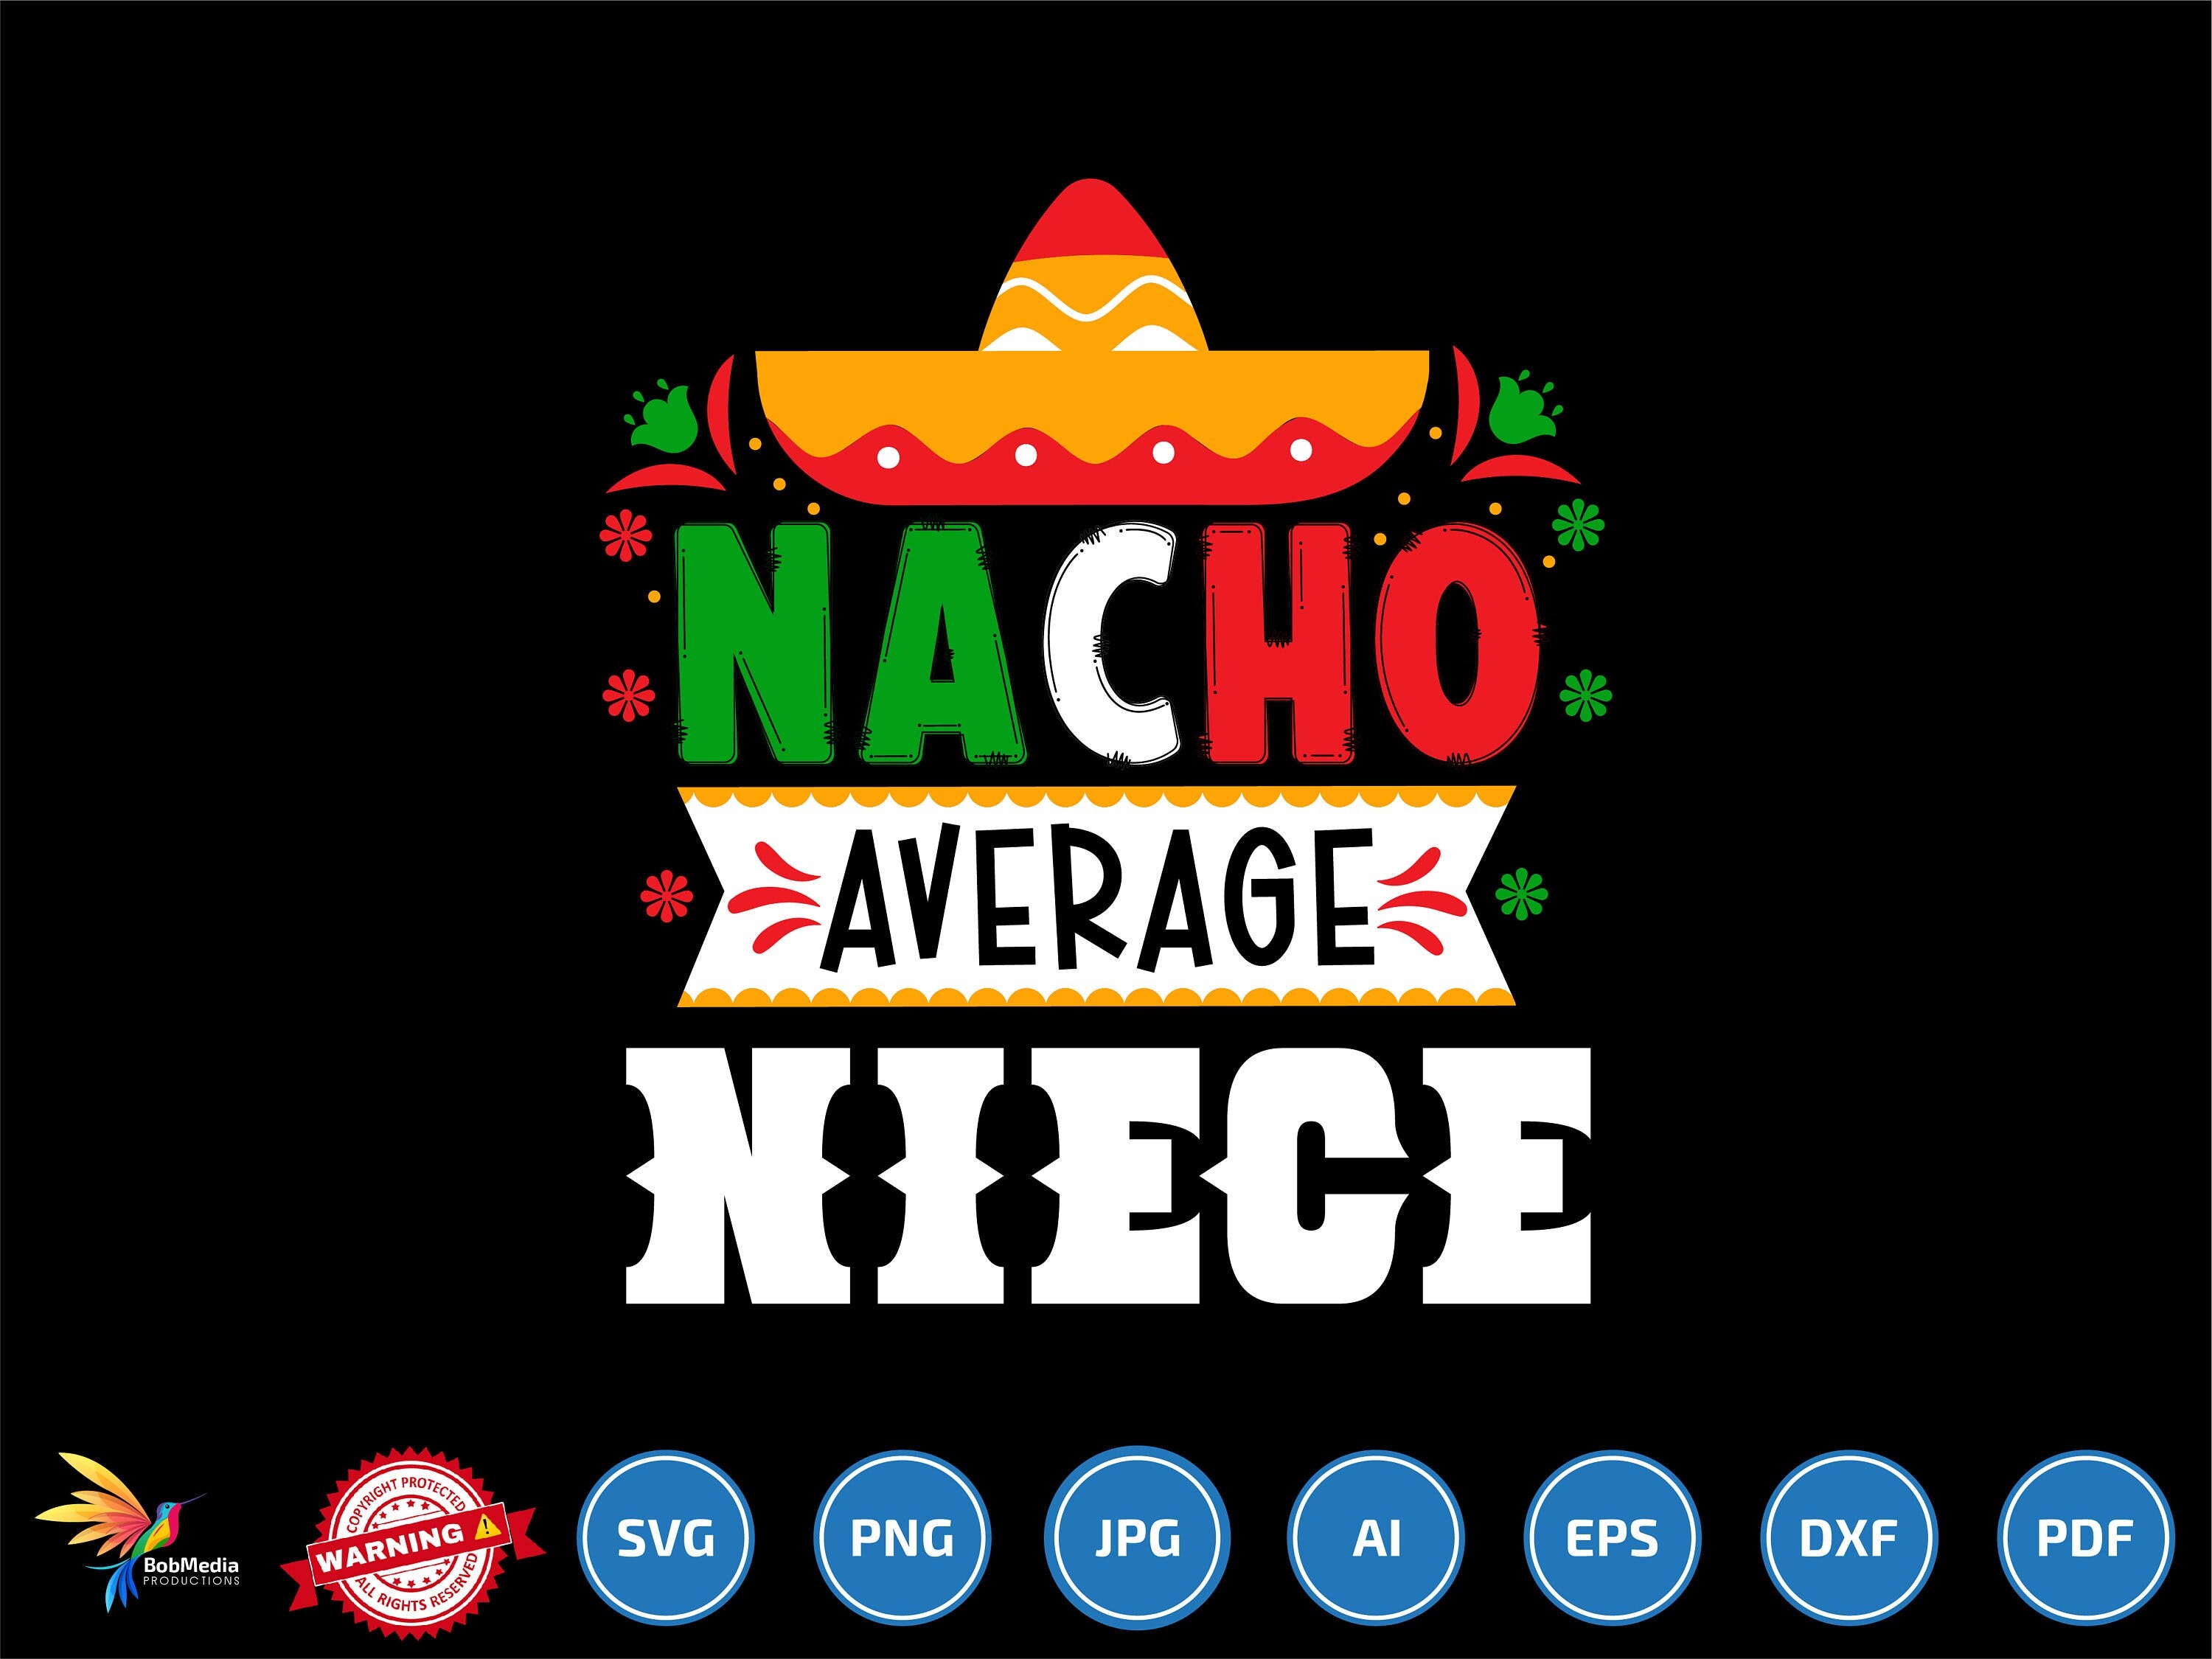 Nacho Average Niece svg png, Funny Mexican Party, Mexican Fiesta svg, Happy Cinco De Mayo svg, Fiesta Squad svg png, Gift for Niece svg